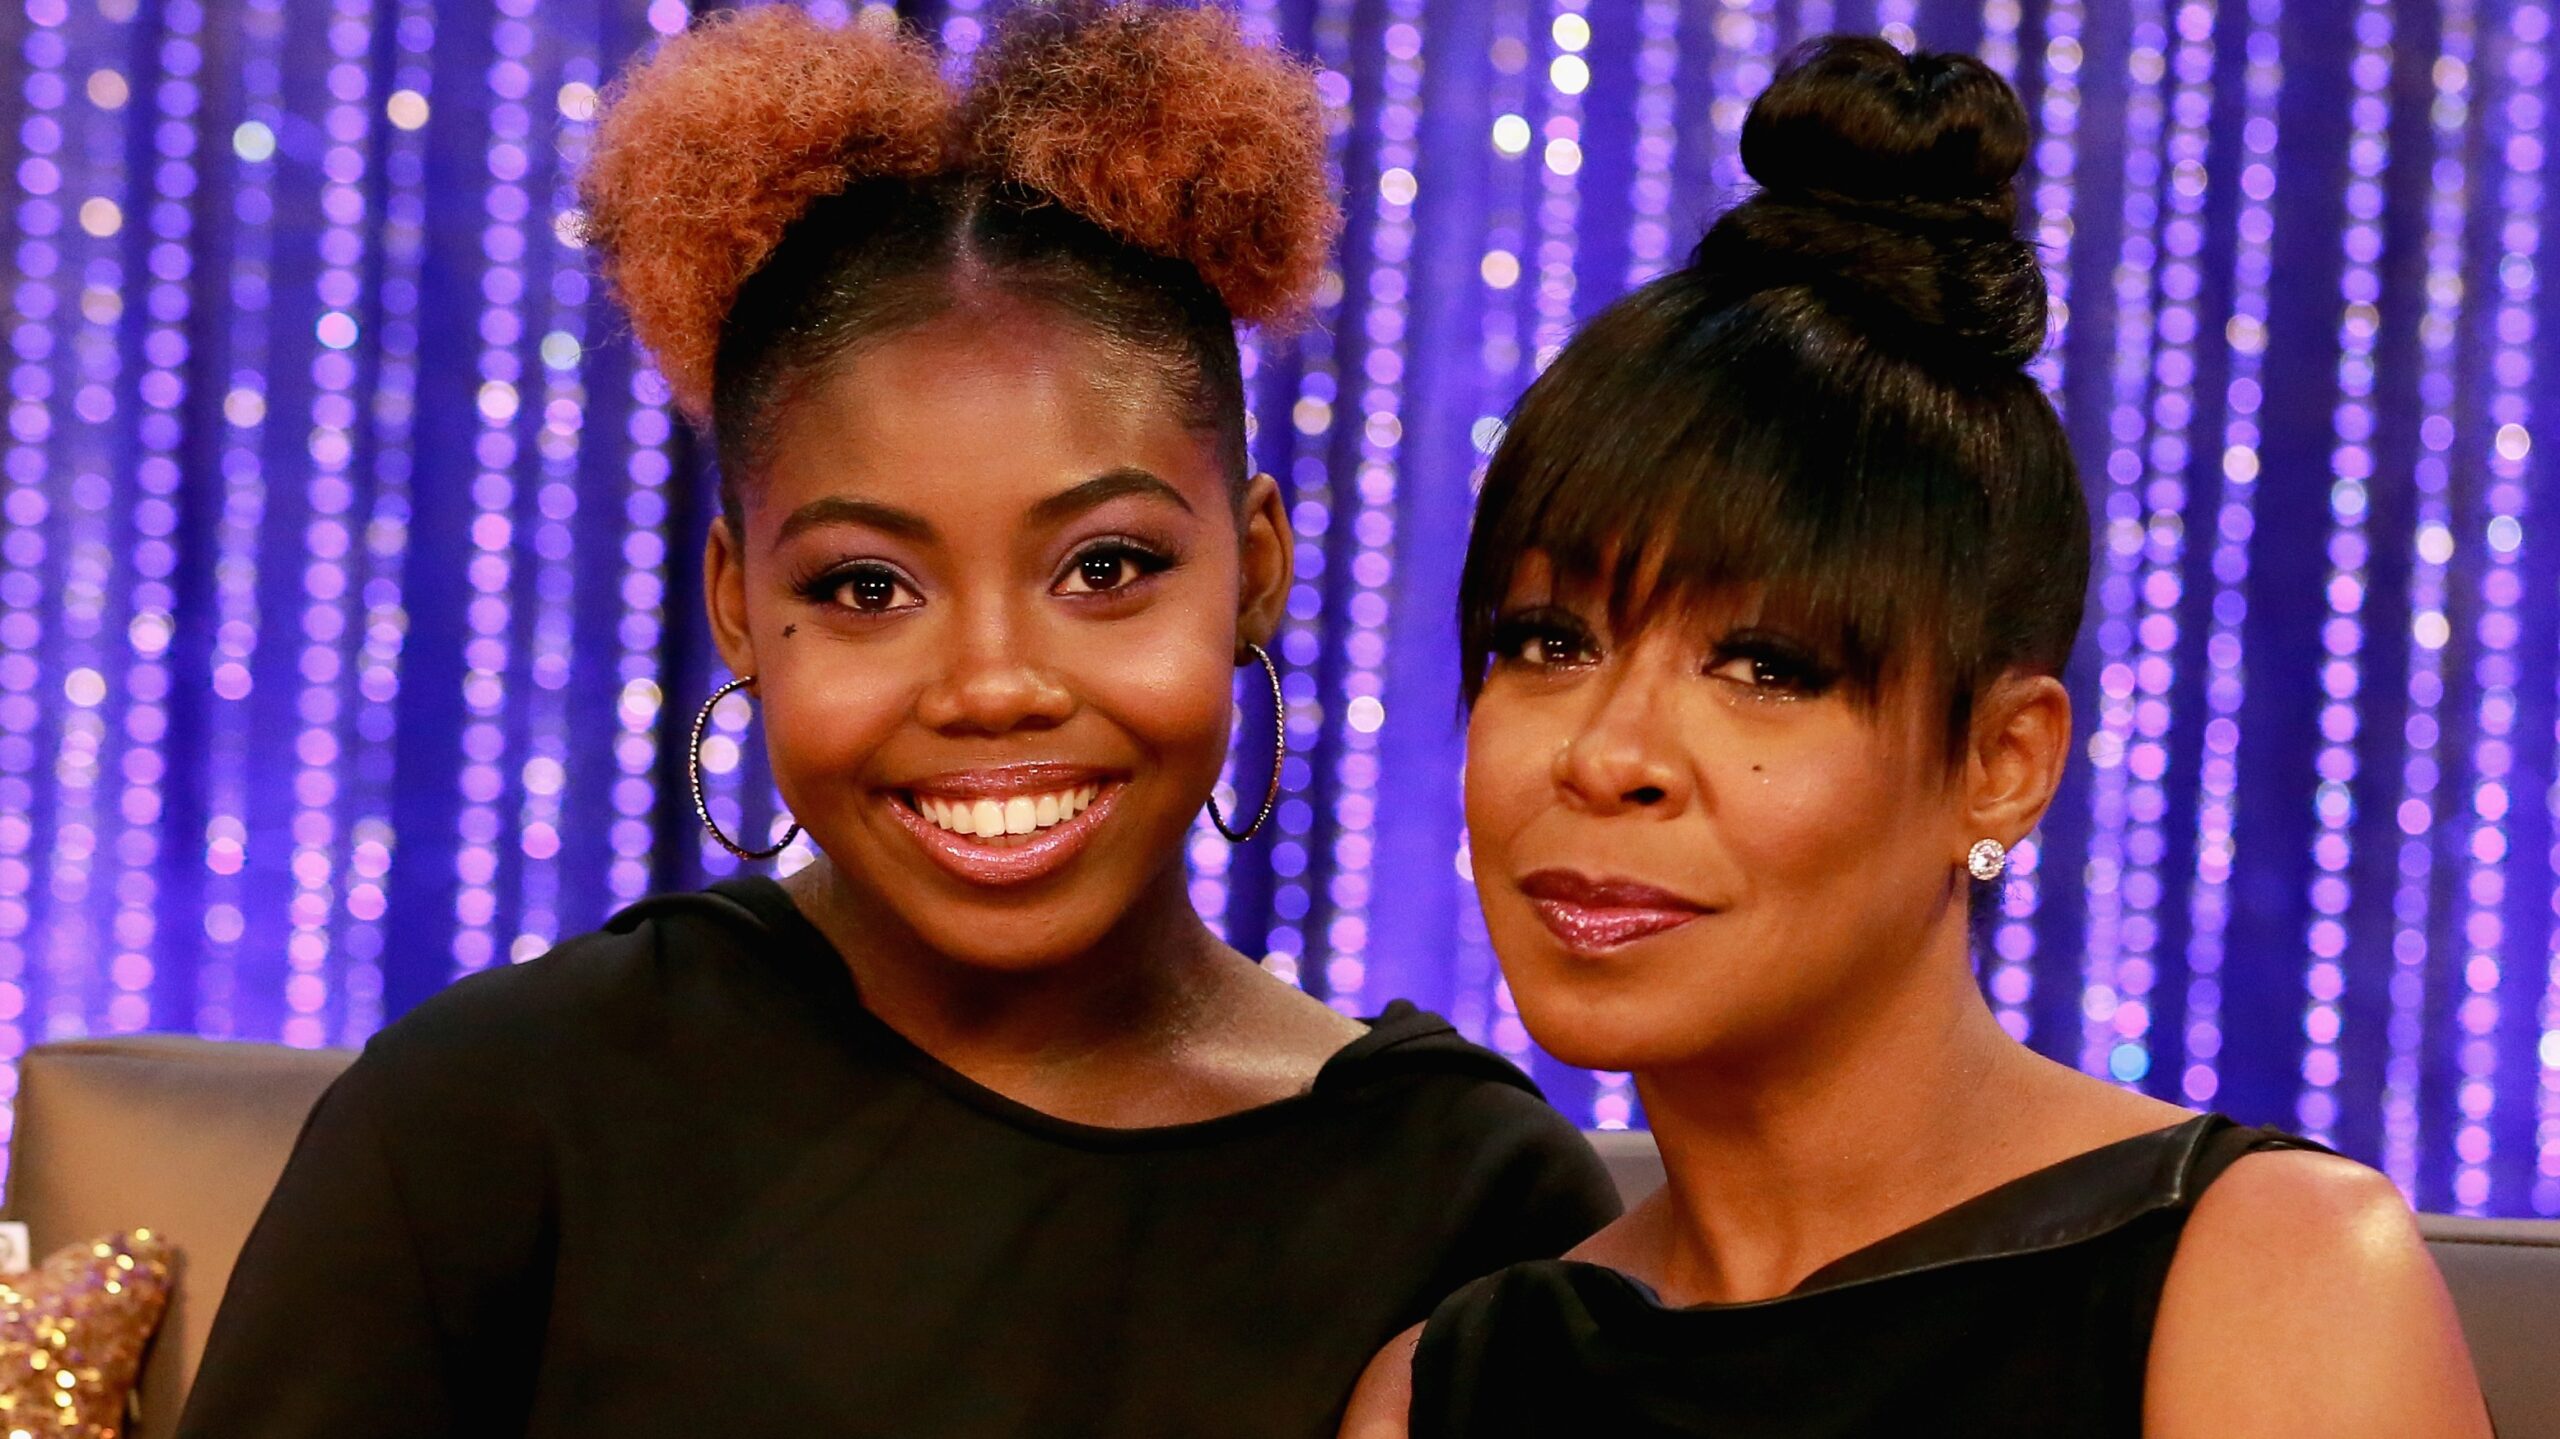 Tichina Arnold Was ‘Fully Supportive’ When Her Daughter Alijah Pursued Singing